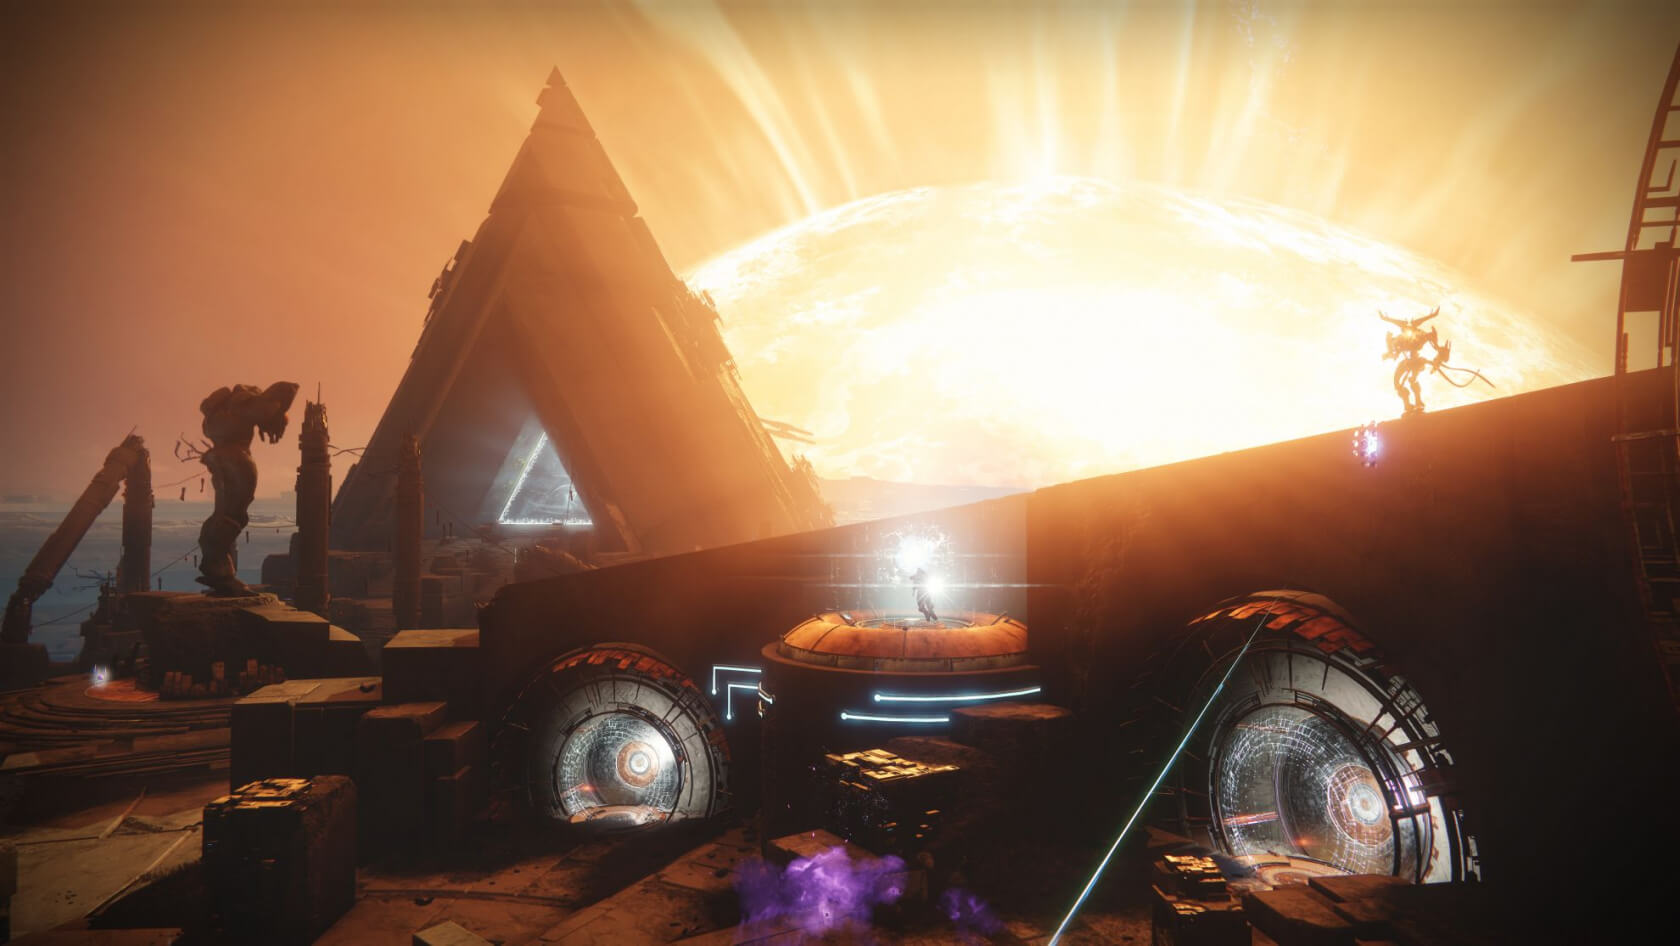 Bungie locked Destiny 2 content after releasing first DLC